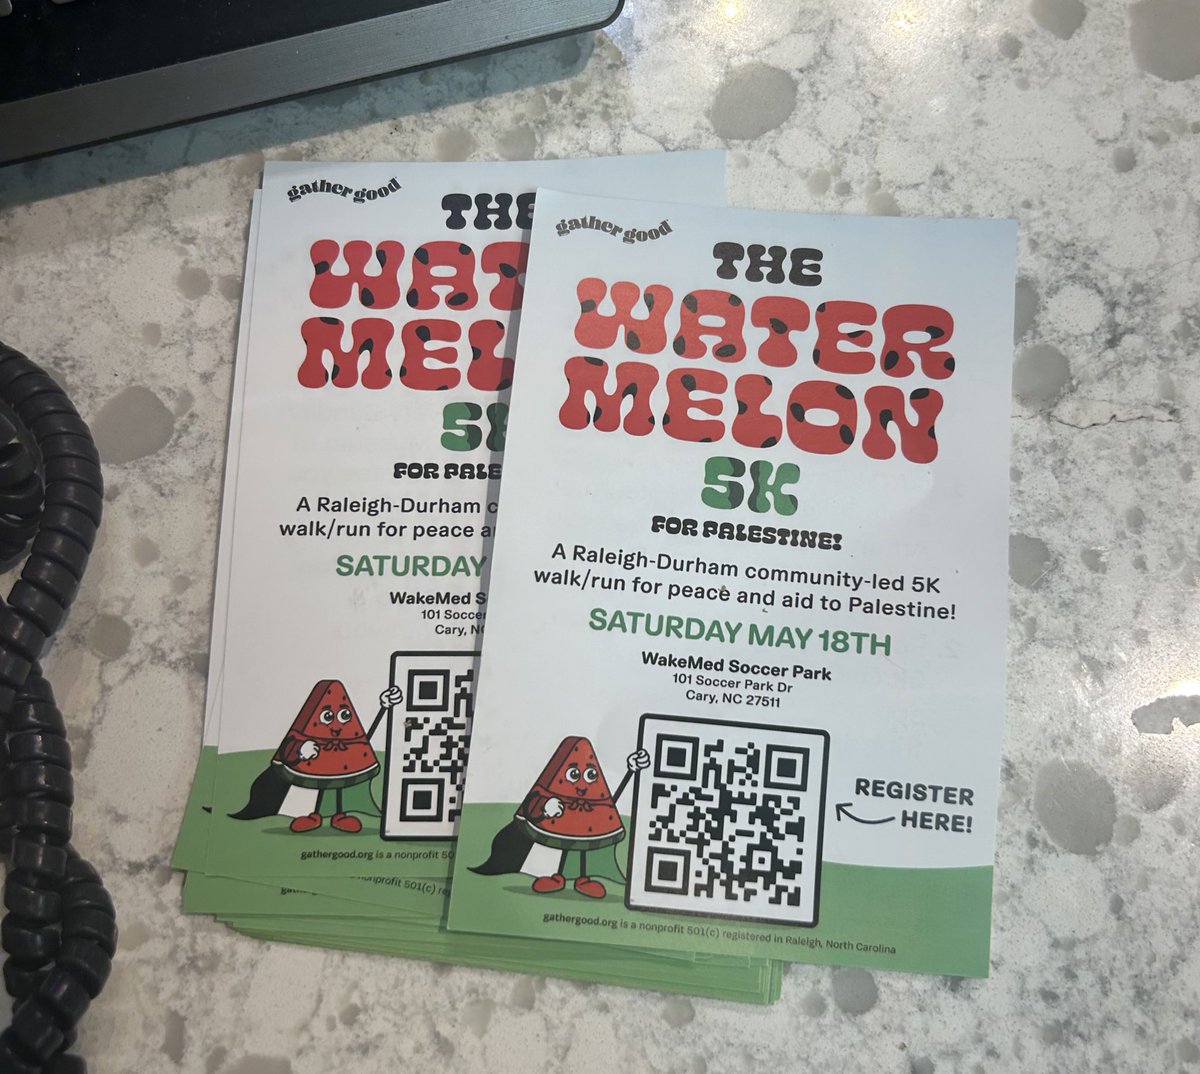 for those living near raleigh / durham nc ! saw these fliers at my work